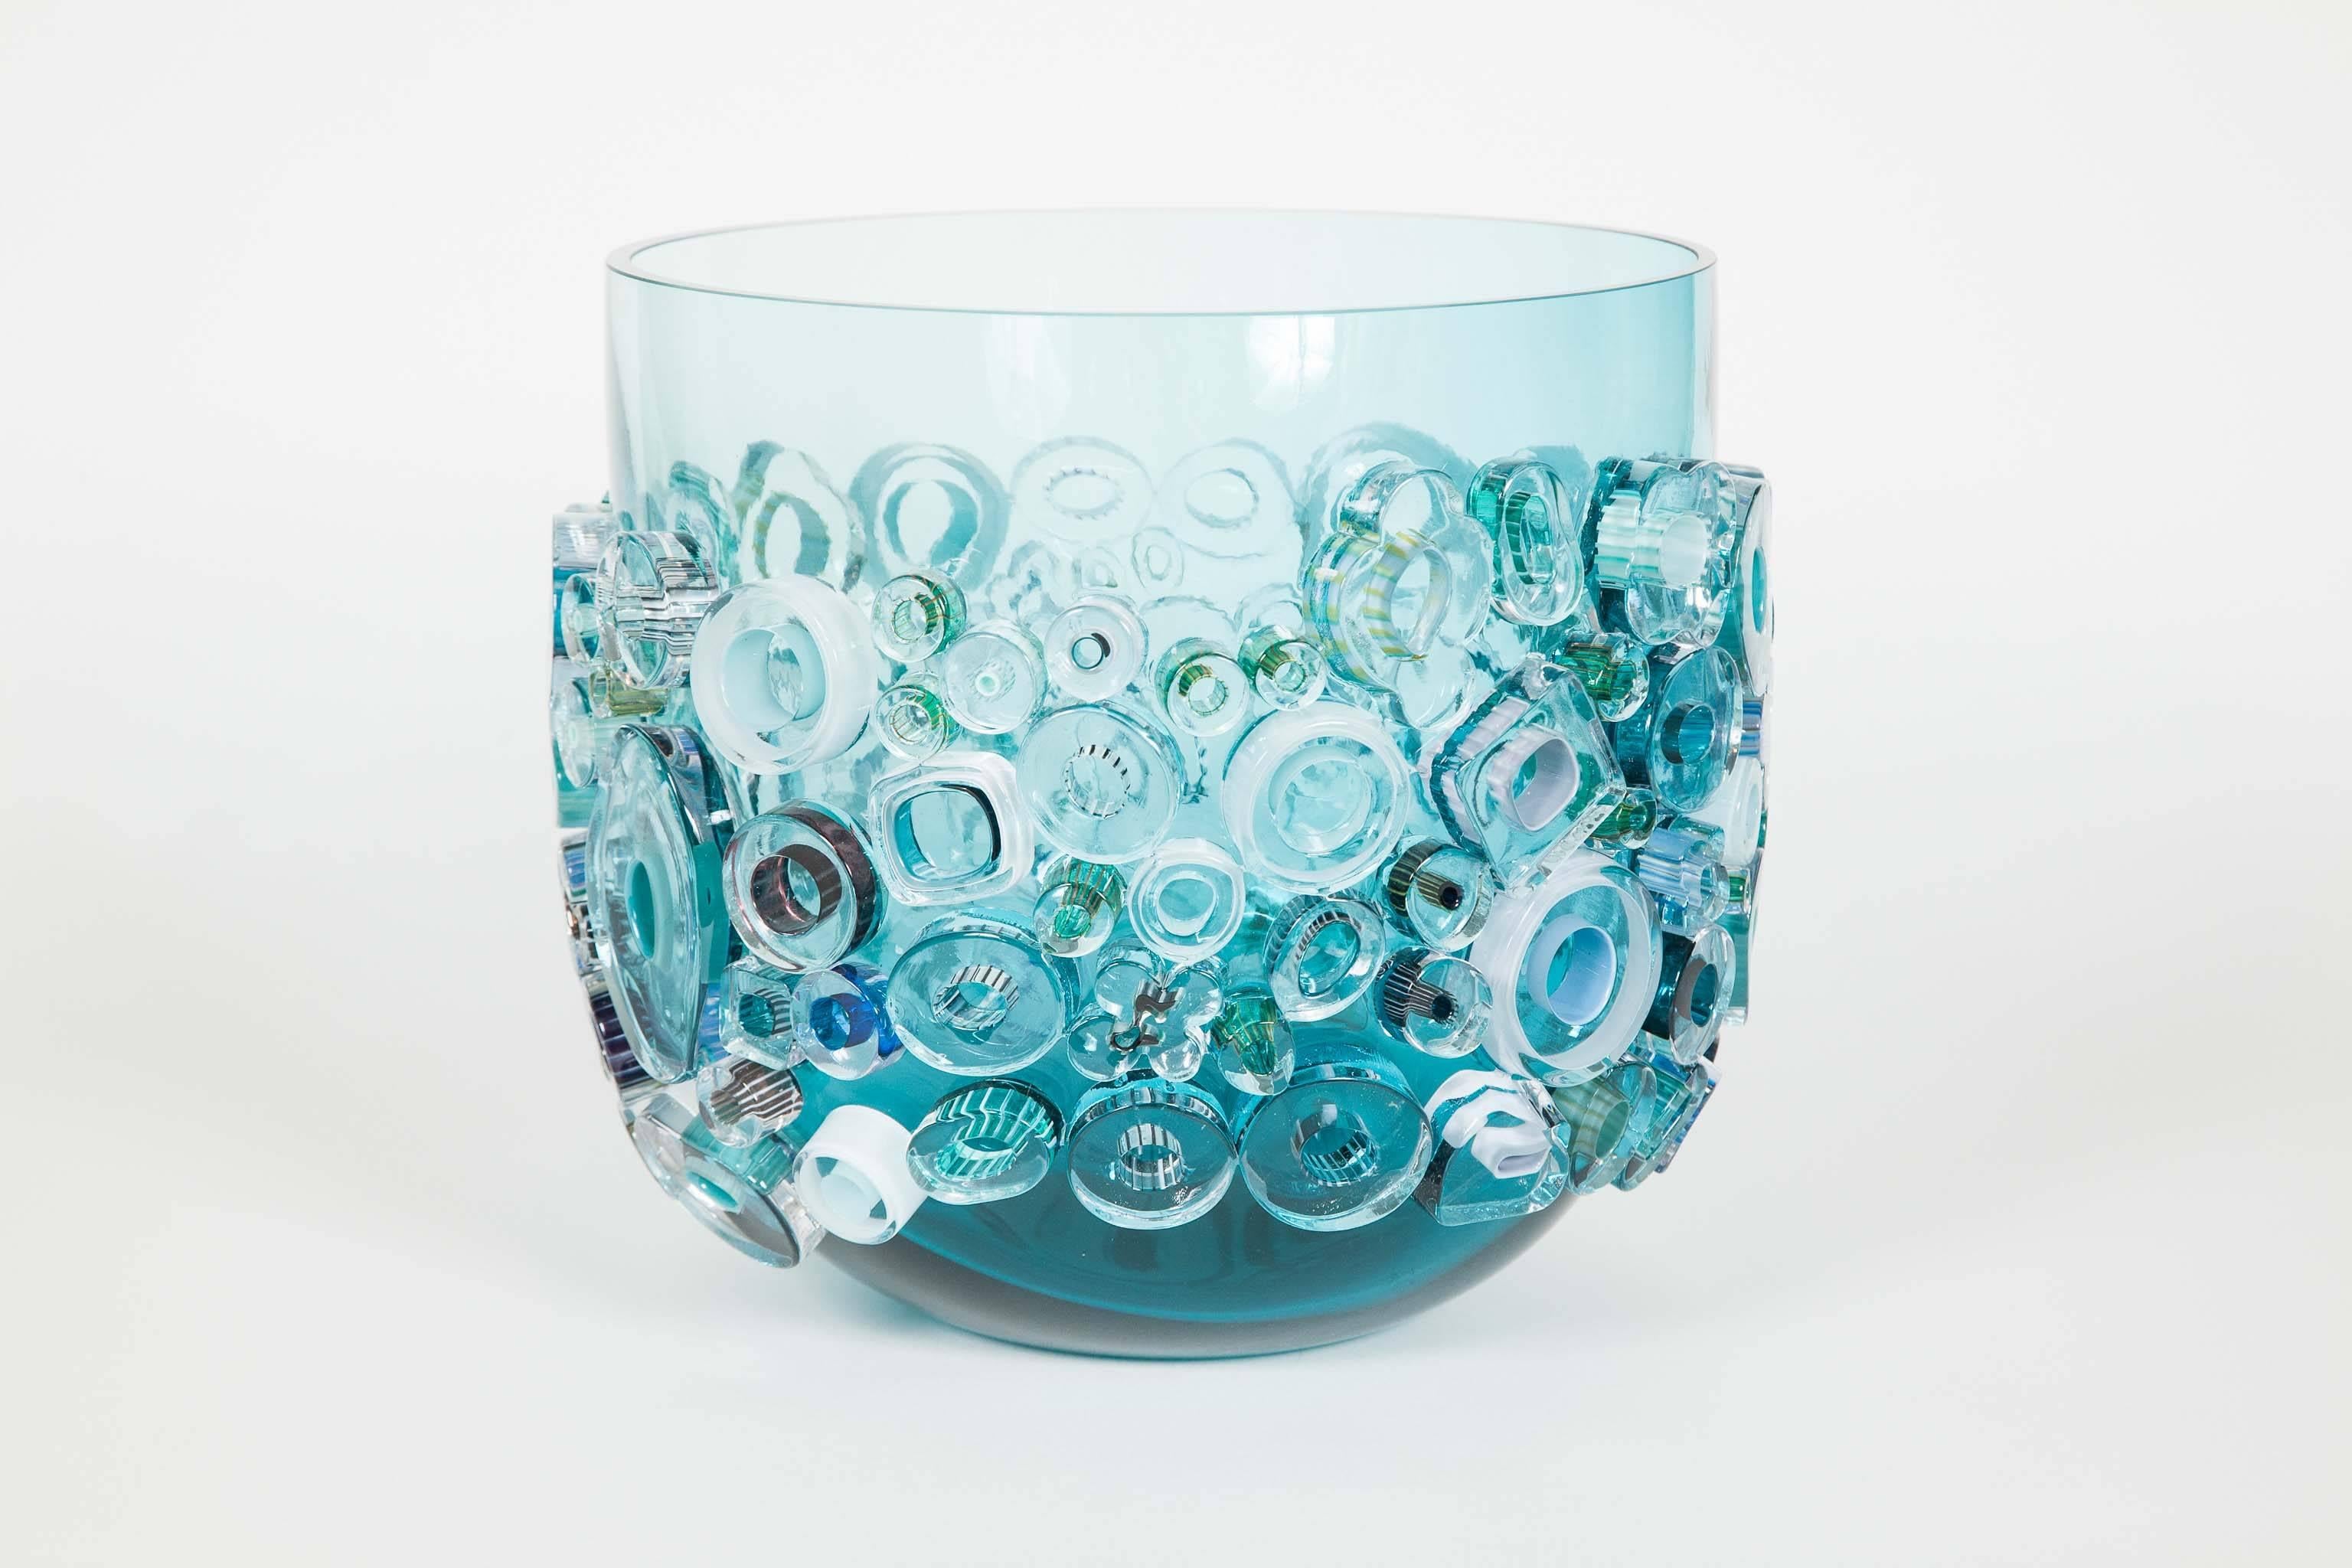 Art Glass Common Ray in Aqua Light, a turquoise & blue Glass Centrepiece by Sabine Lintzen